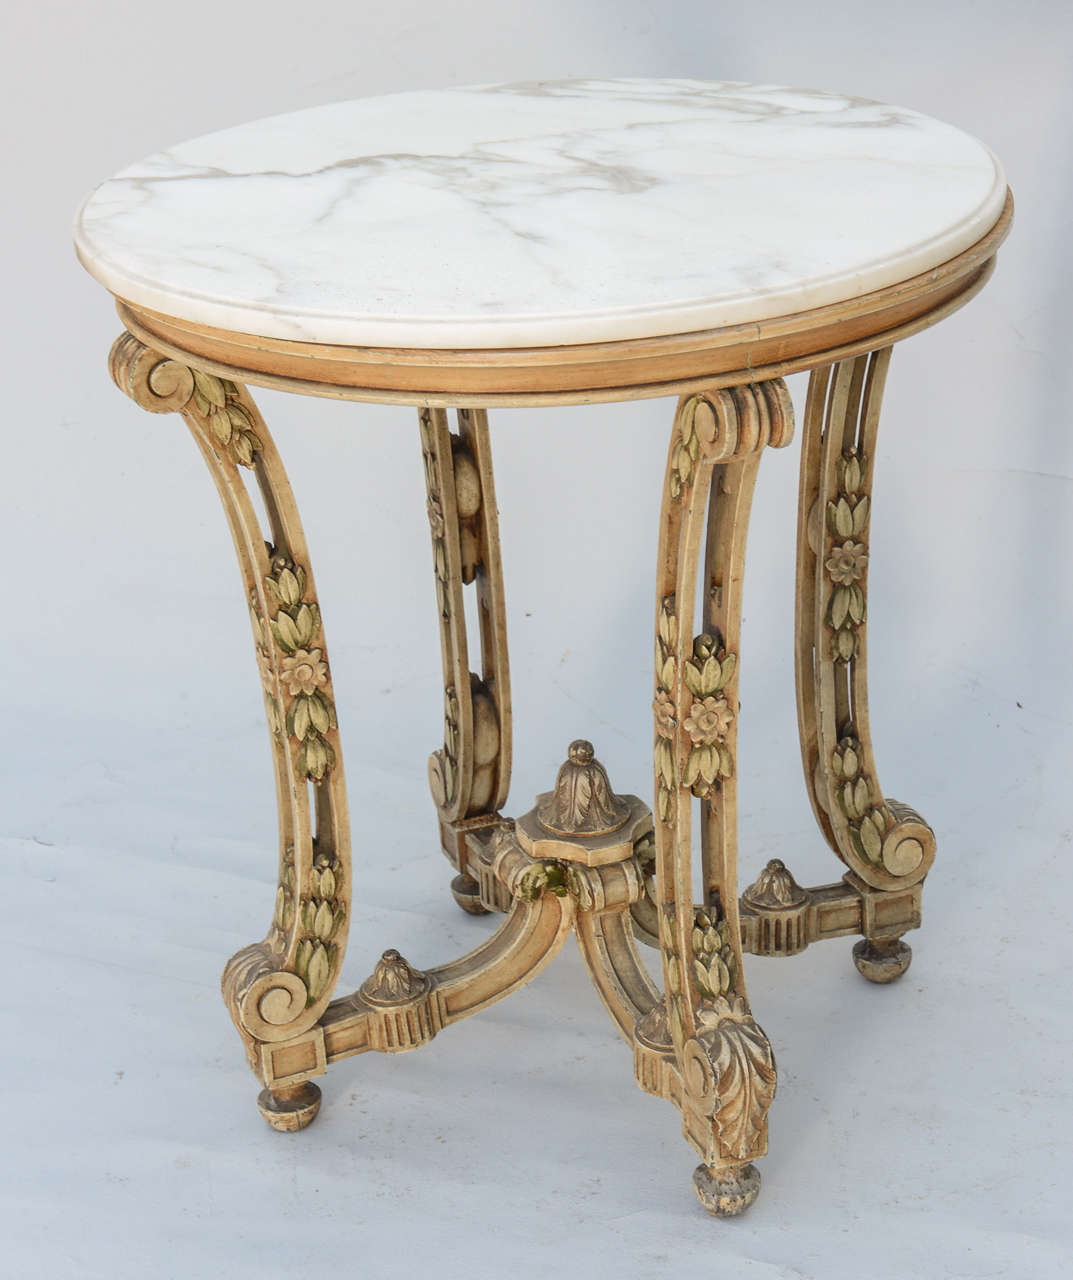 Italian Occasional Table with Round Marble Top on Pierced Painted Base c. 1900